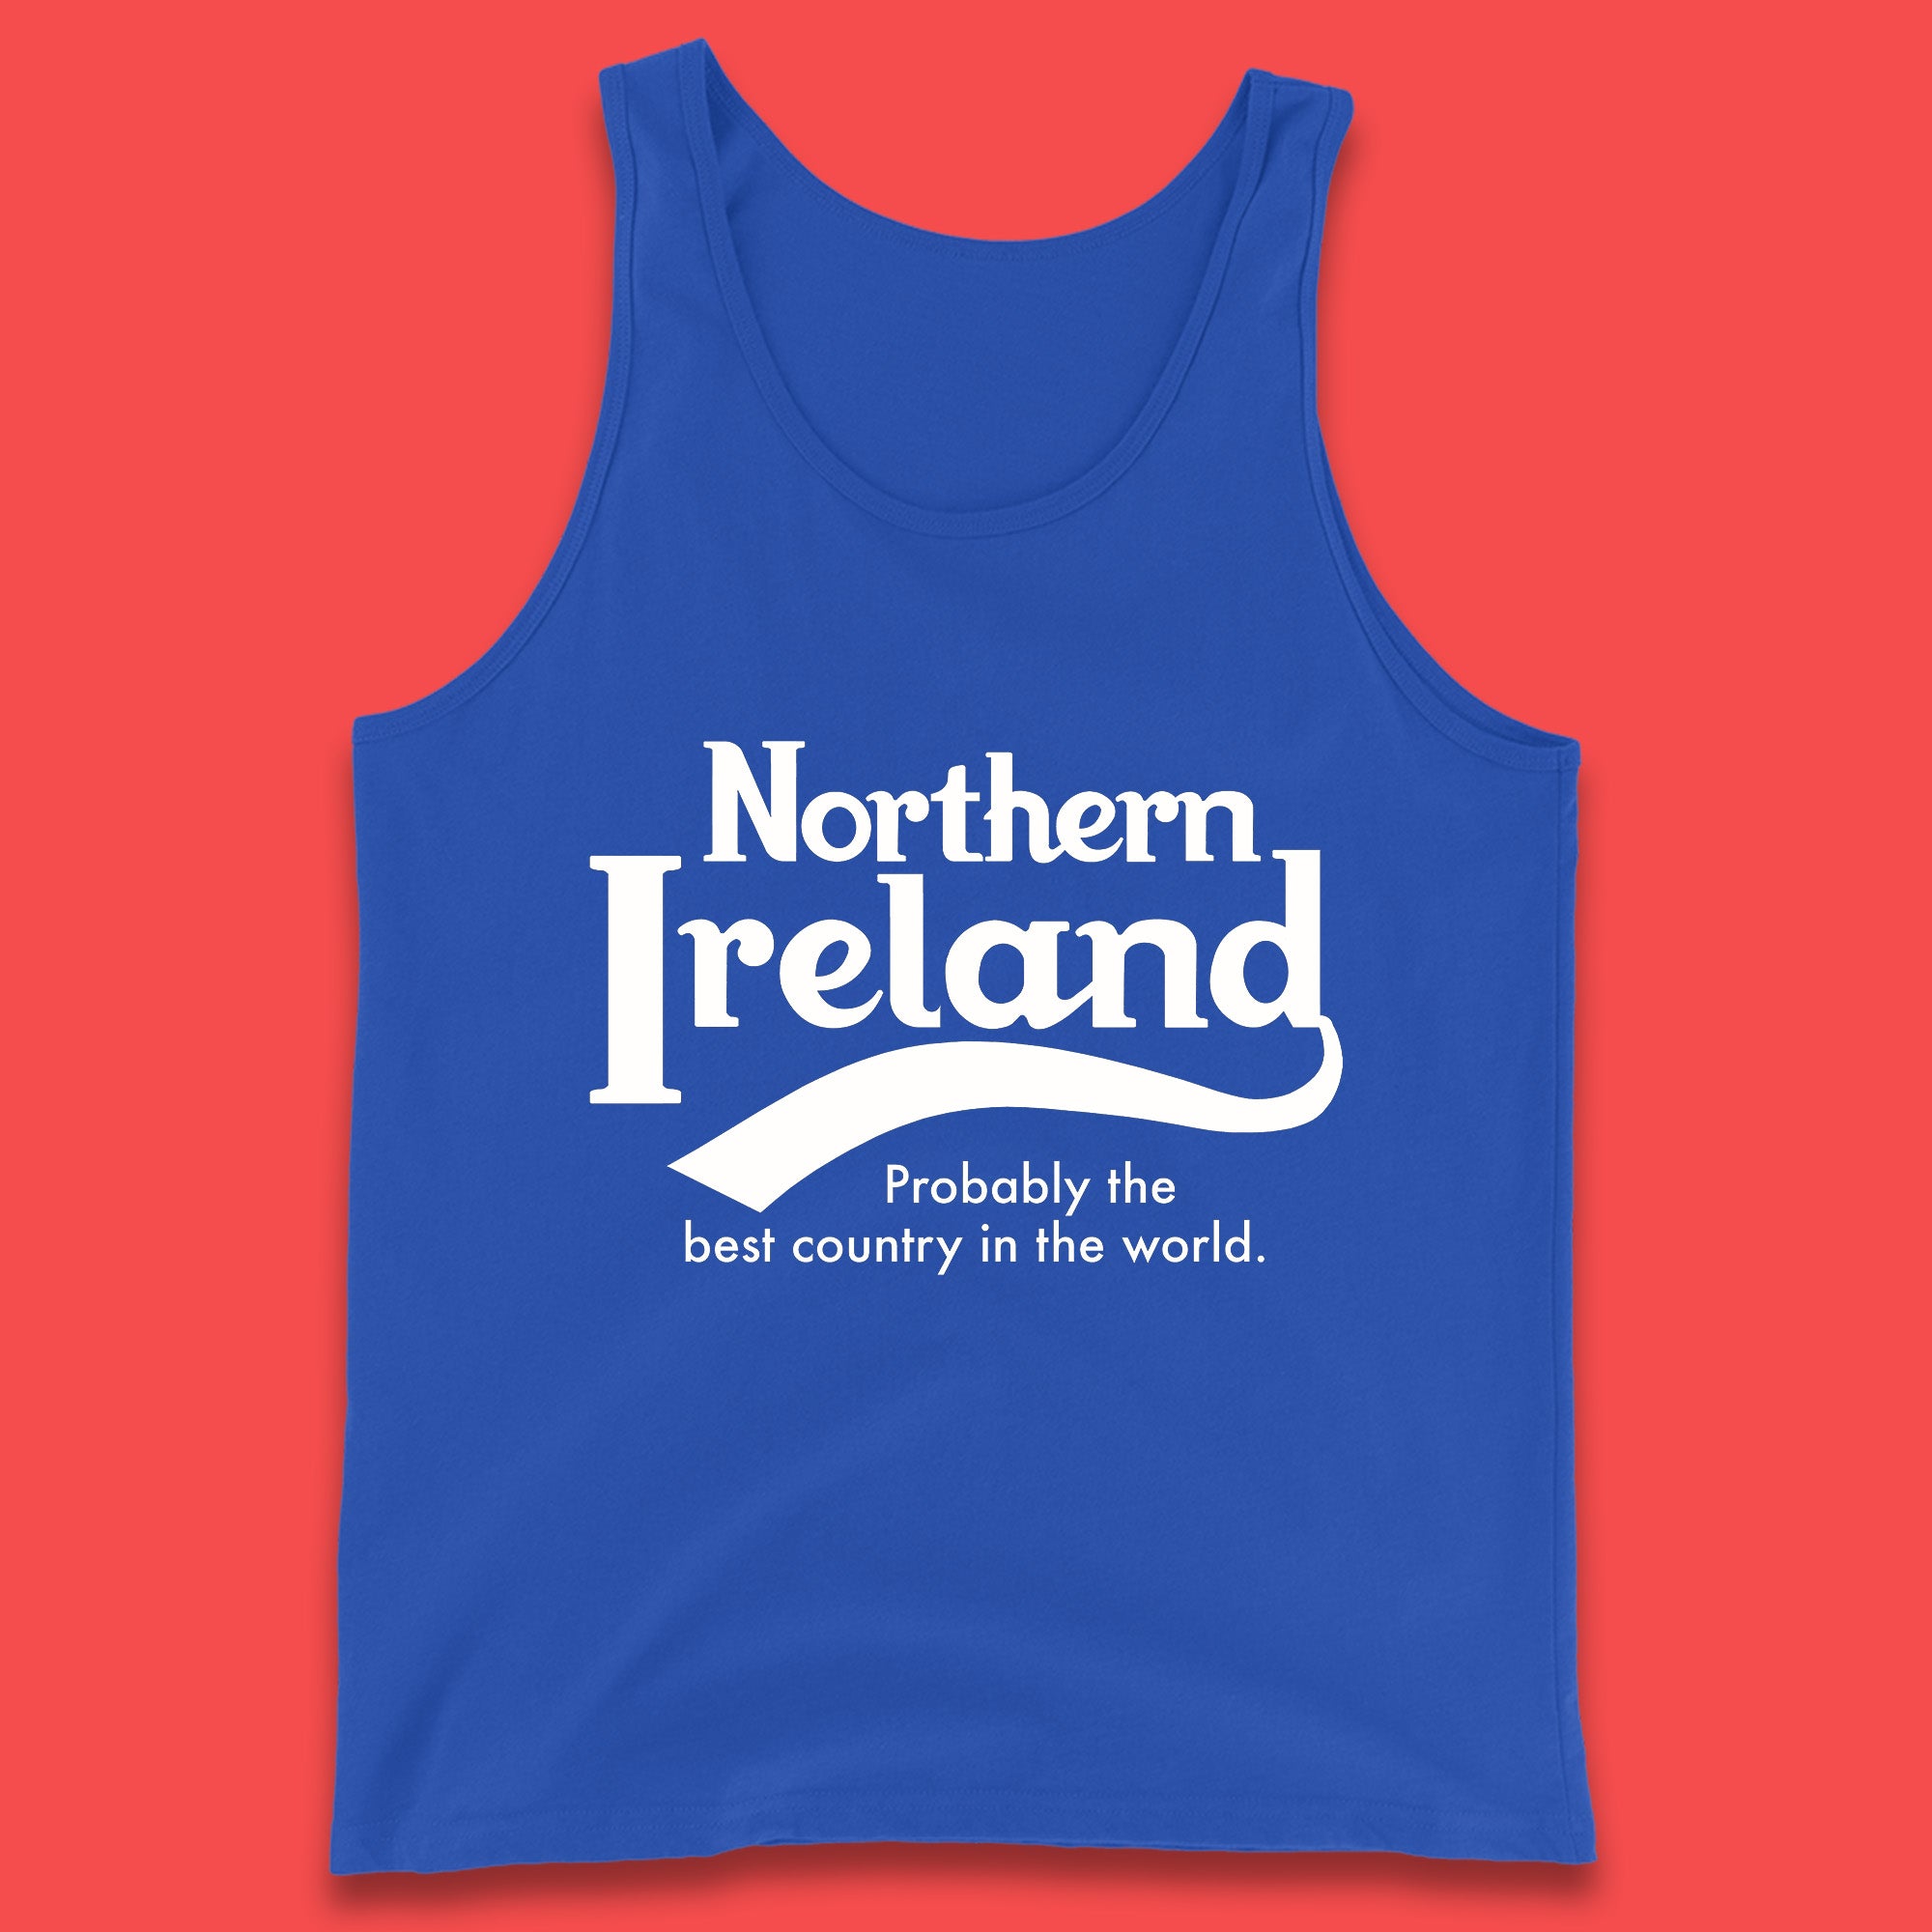 North Ireland Probably The Best Country In The World Uk Constituent Country Northern Ireland Is A Part Of The United Kingdom Tank Top